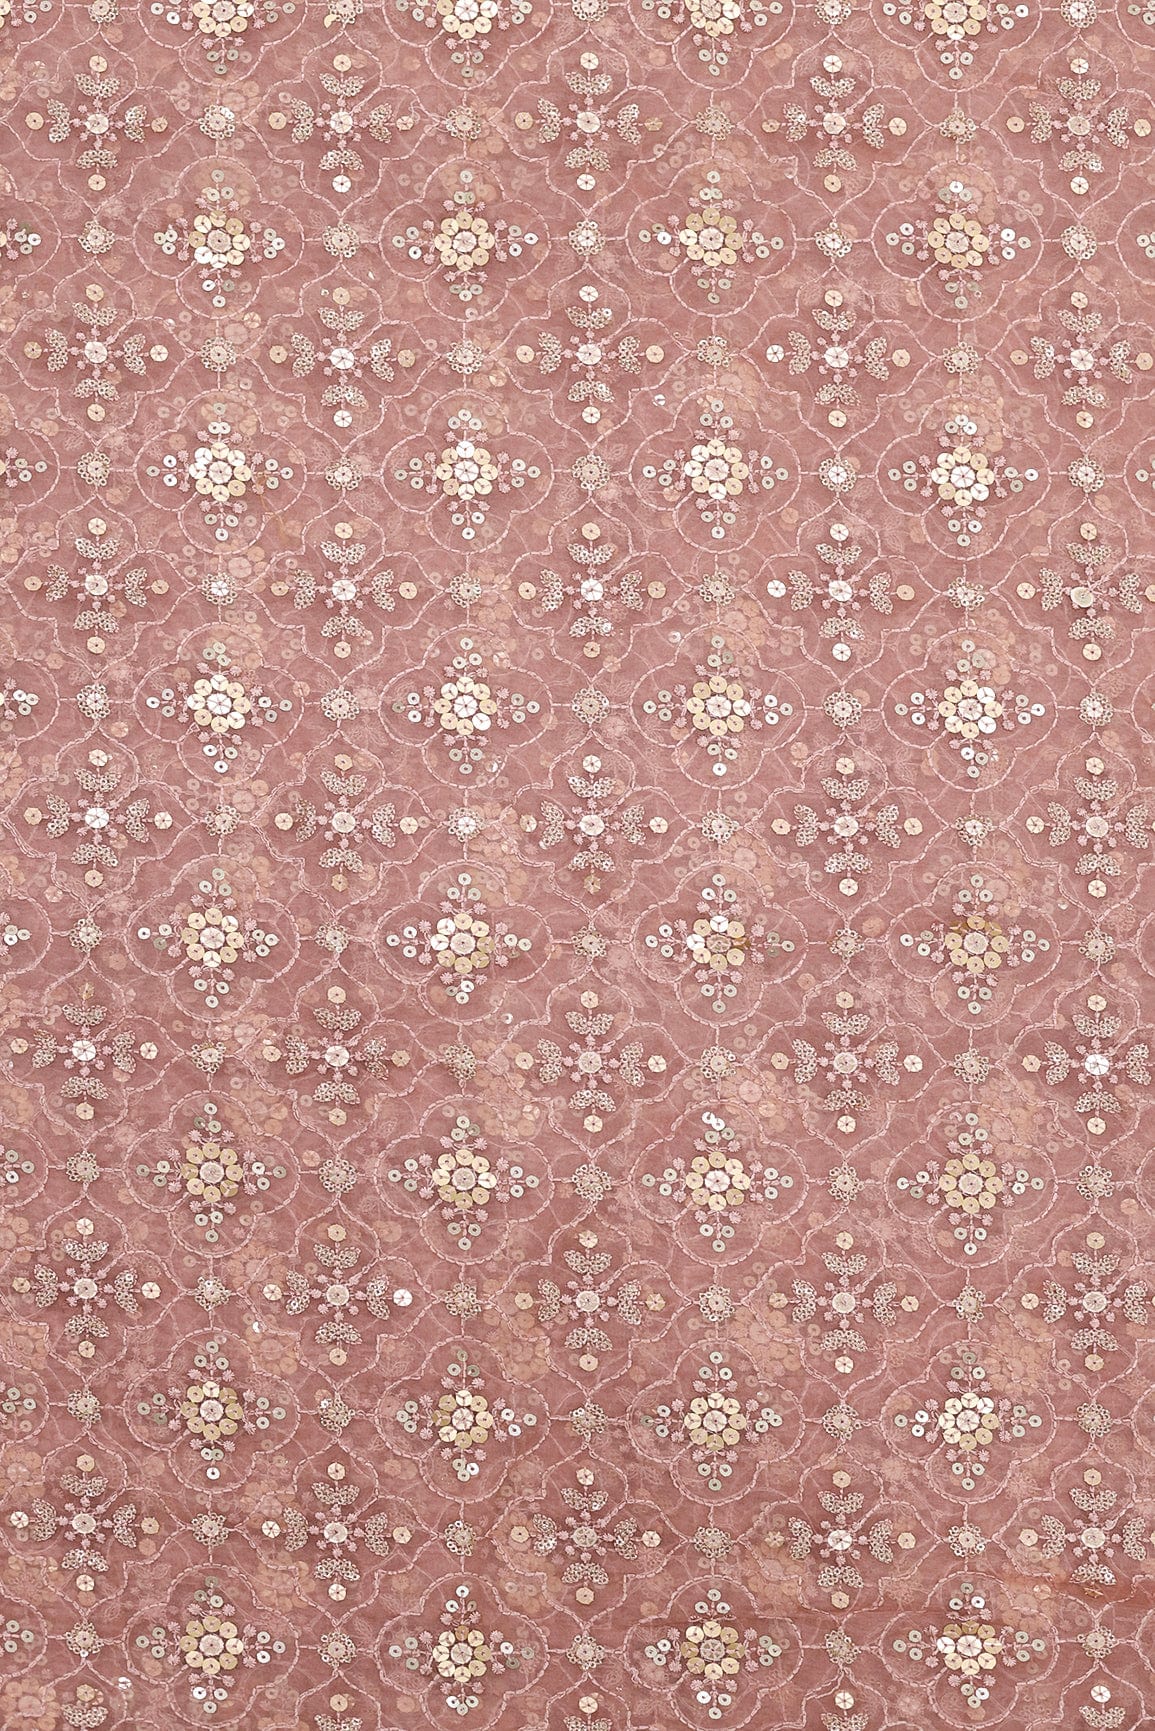 doeraa Embroidery Fabrics 3 Meter Cut Piece Of Gold Sequins With Pink Thread Embroidery On Pink Organza Fabric